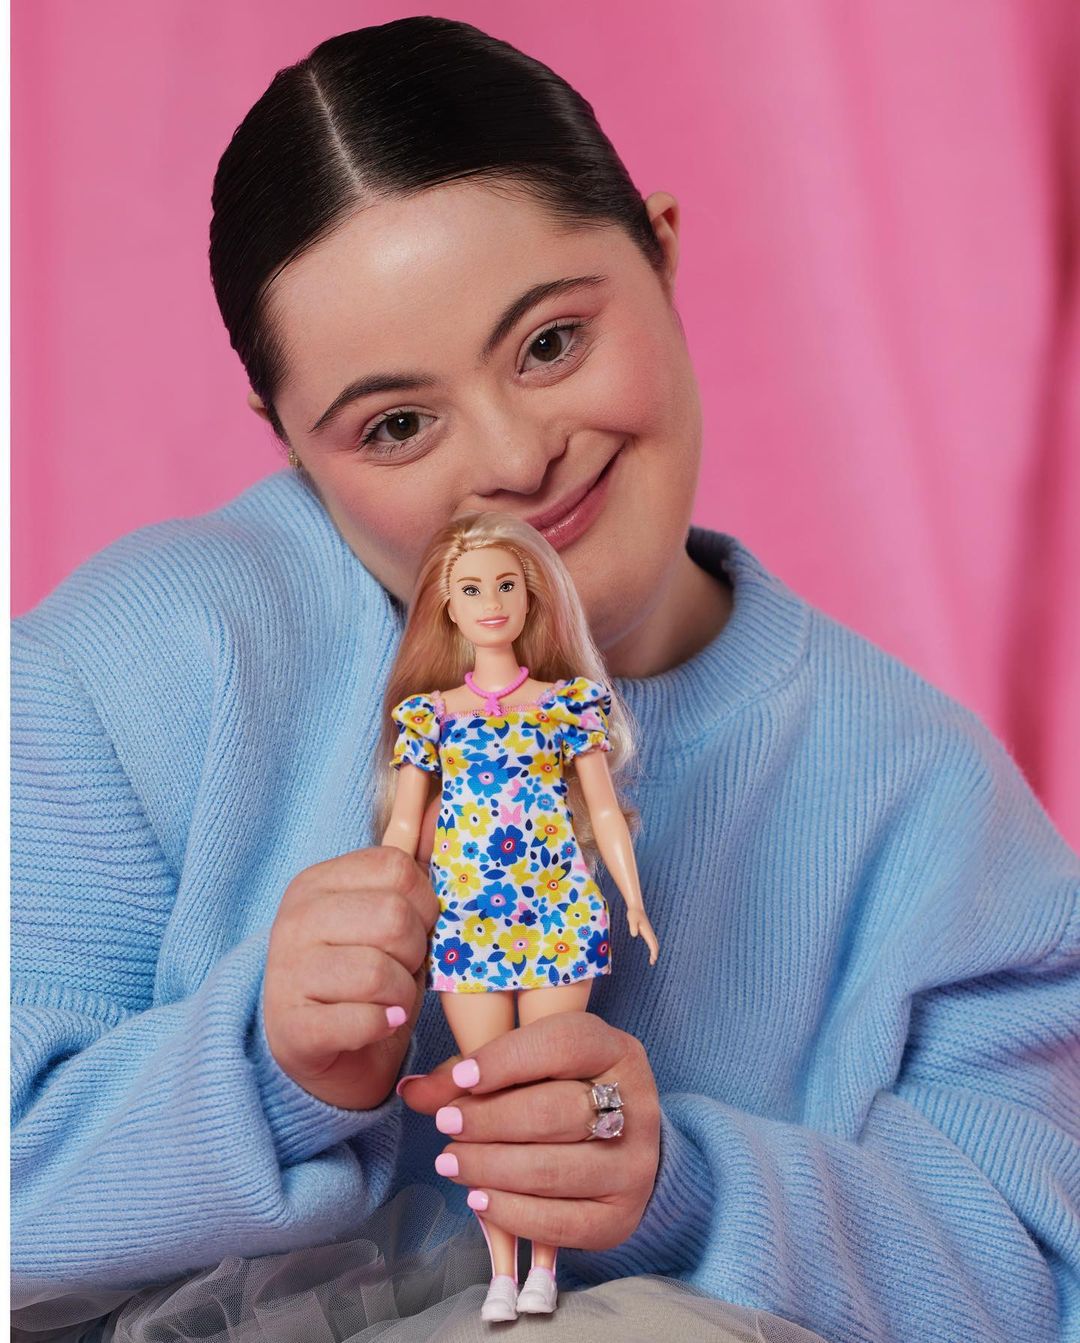 Barbie Has Released Its First Doll With Down Syndrome